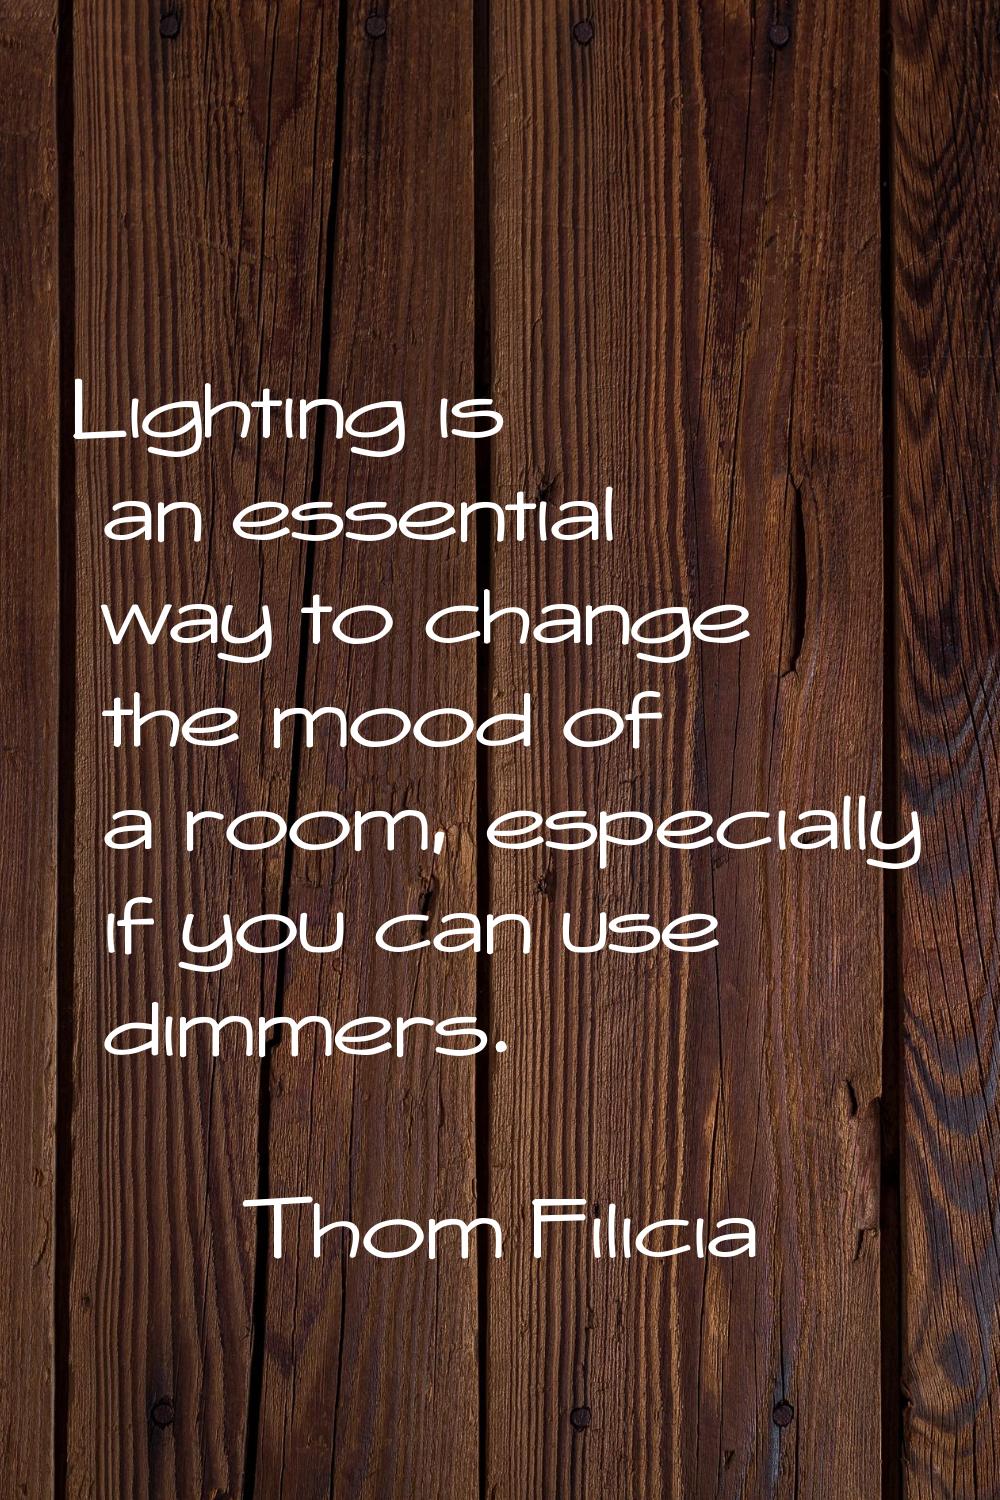 Lighting is an essential way to change the mood of a room, especially if you can use dimmers.